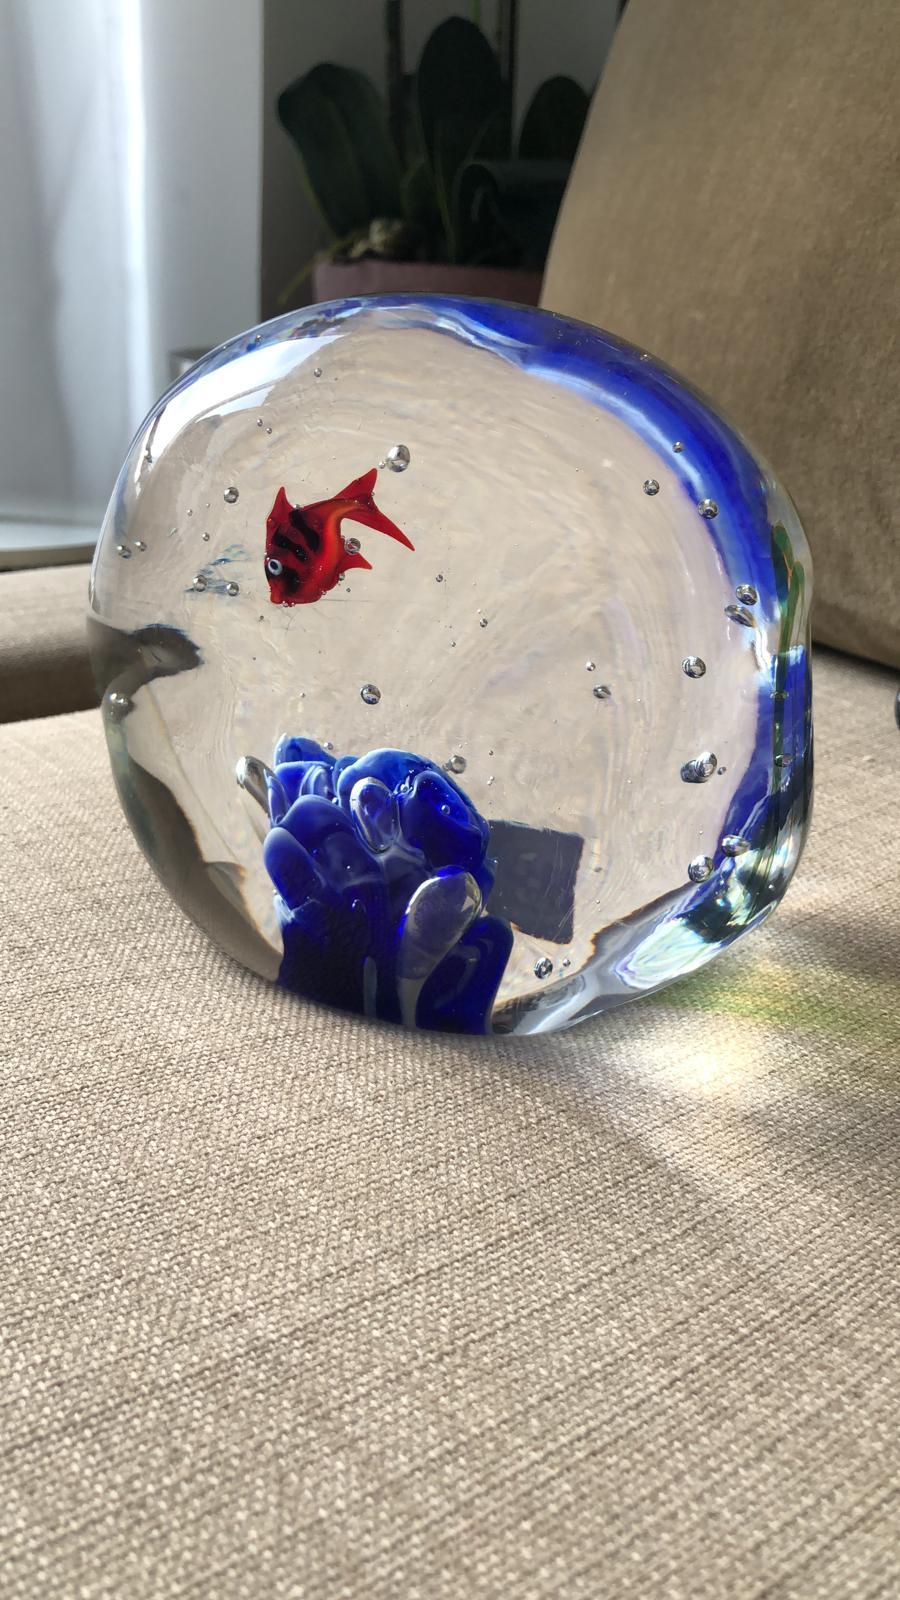 A lovely freeform Italian paperweight with an aquarium inside hand-engraved signed Zanetti L and labeled by The Zanetti Vetreria Artistica which was founded in 1956 by the glassmaster Oscar Zanetti and his son Licio.
2890 gr.
Italy, circa 1970s.